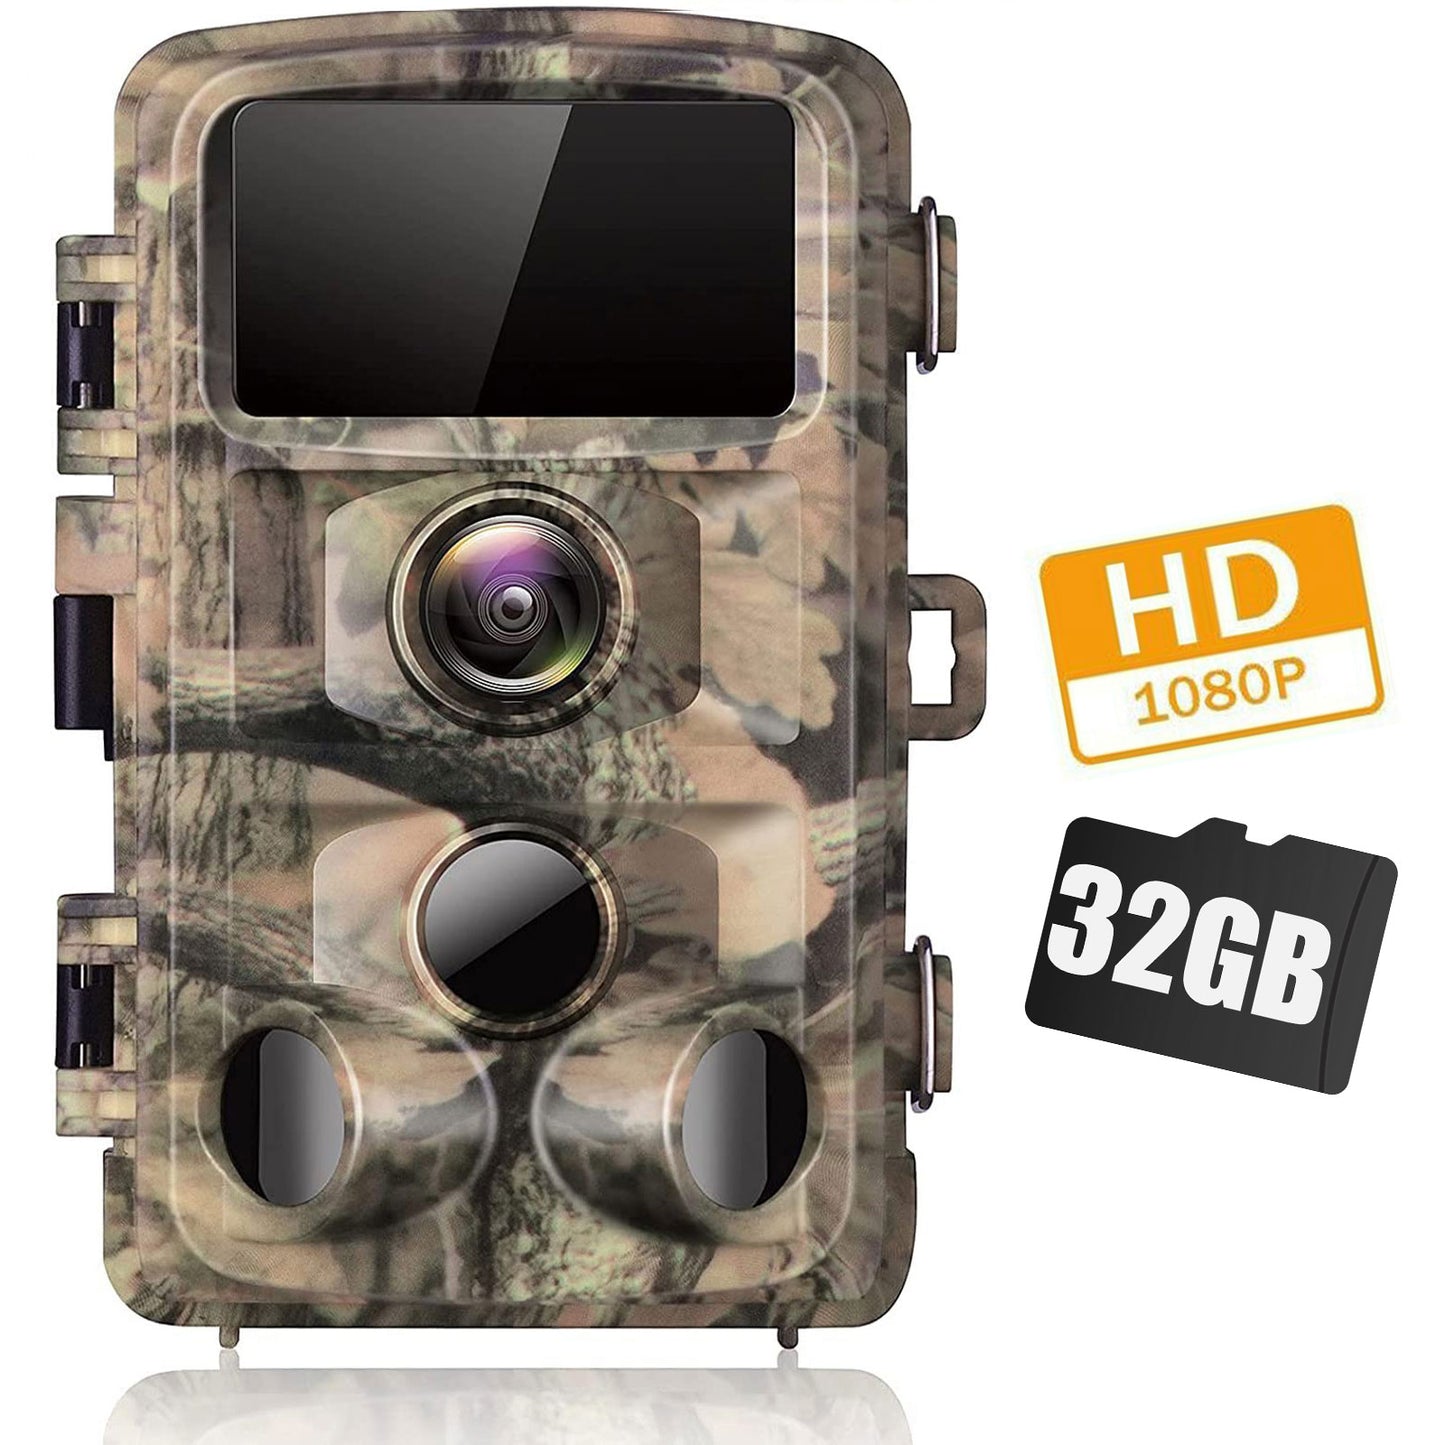 CAMPARK Trail Camera 1080P Game Hunting Camera with Night Vision Waterproof Motion Activated Trail Cam with SD Card